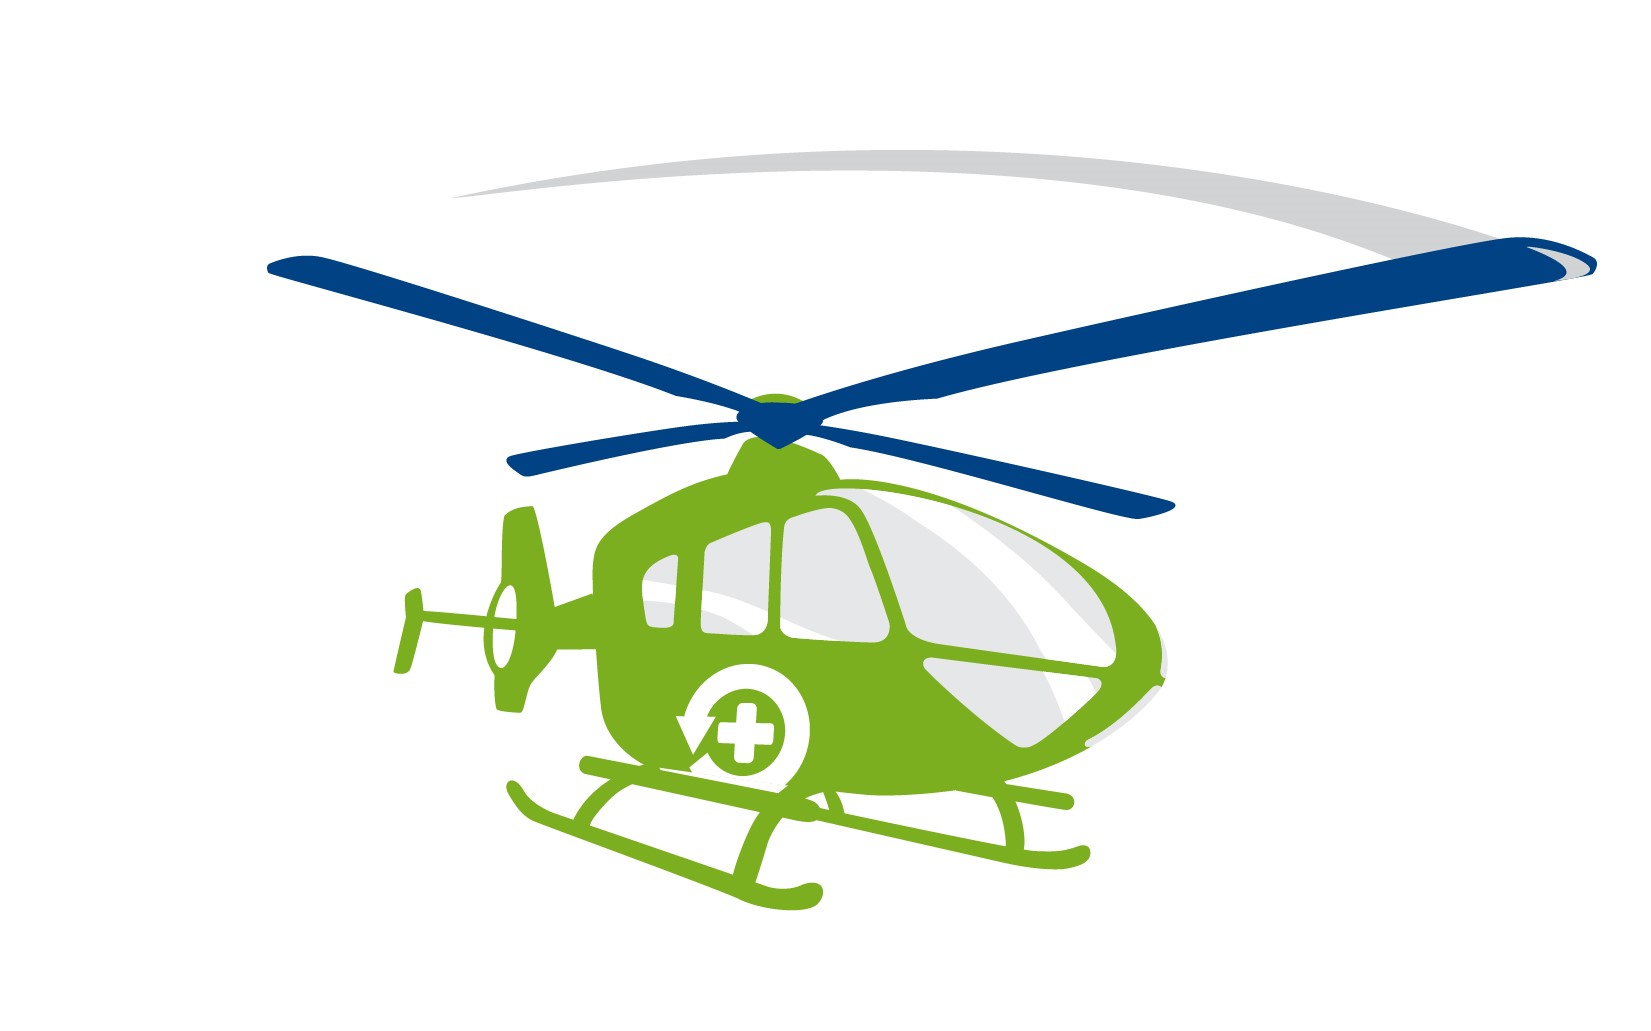 Our X account - Great Western Air Ambulance Charity